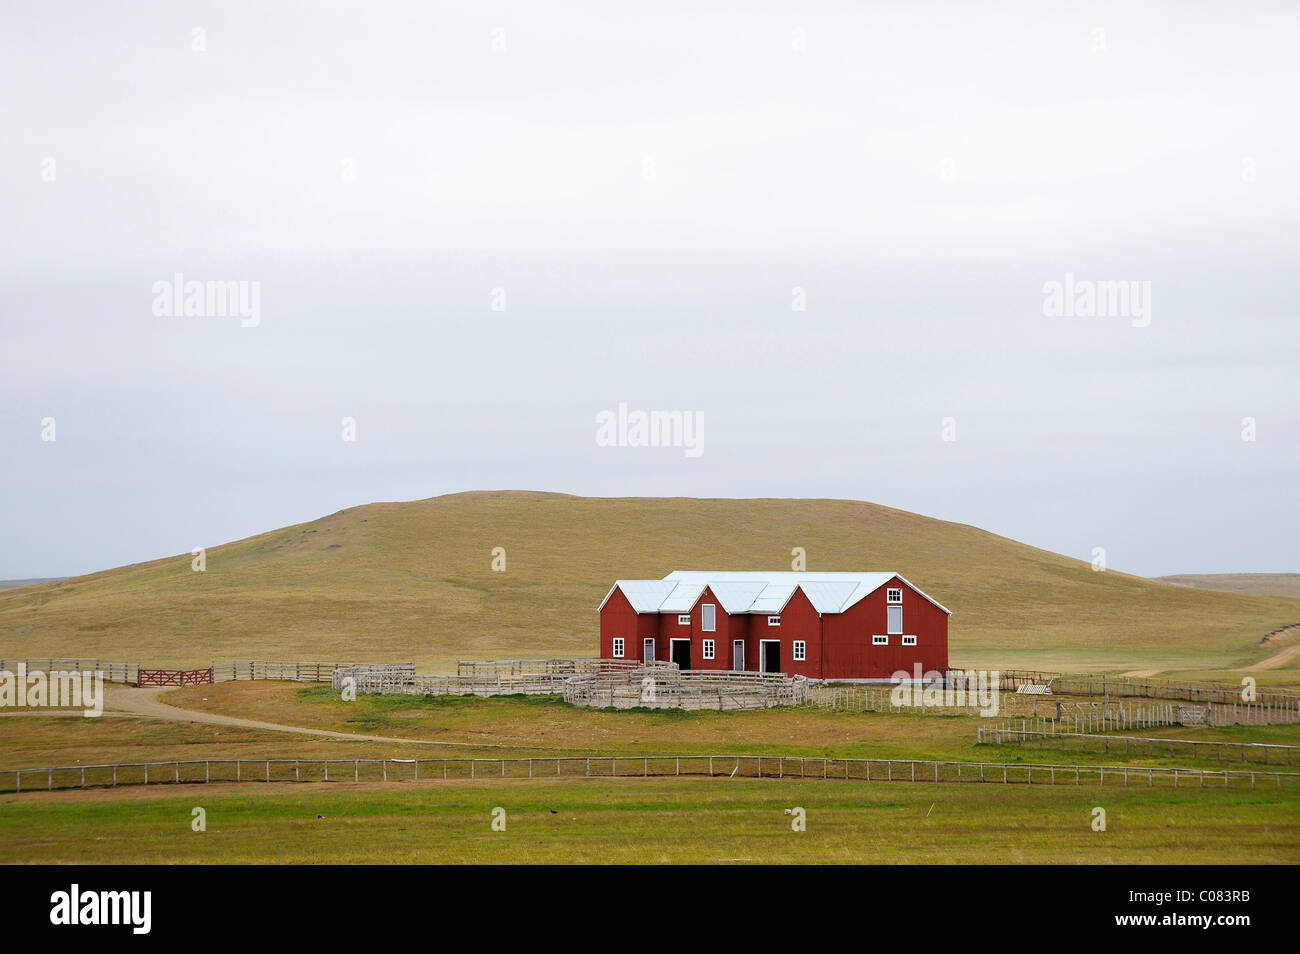 Red sheepshearers' shed in a hilly landscape, Ushuaia, Tierra del Fuego, Patagonia, Argentina, South America Stock Photo